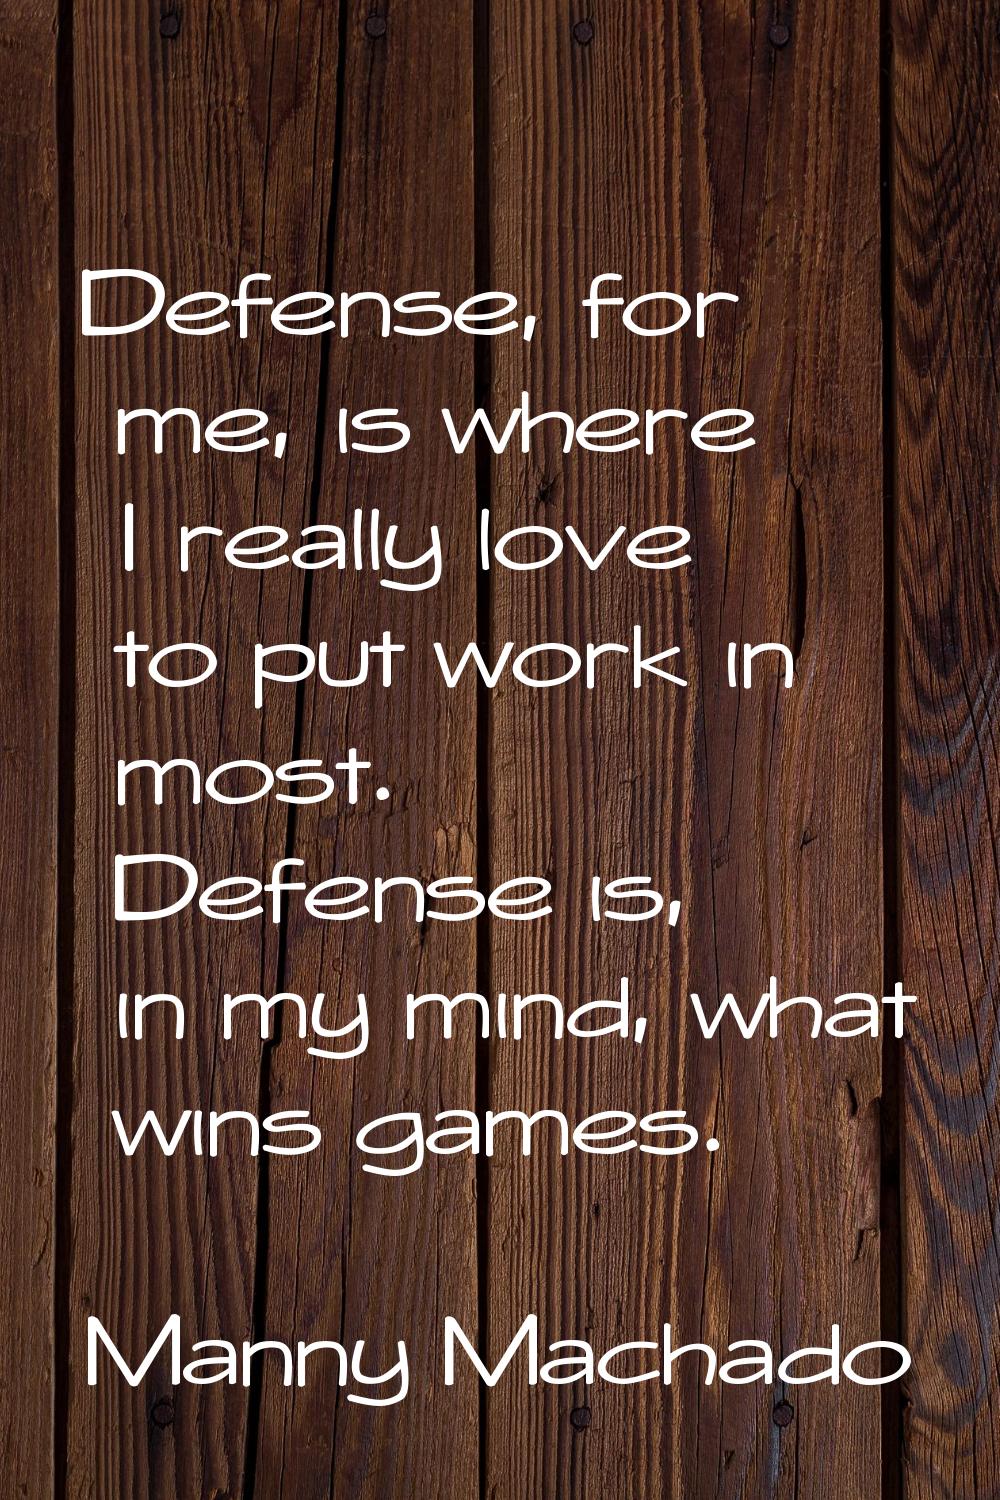 Defense, for me, is where I really love to put work in most. Defense is, in my mind, what wins game